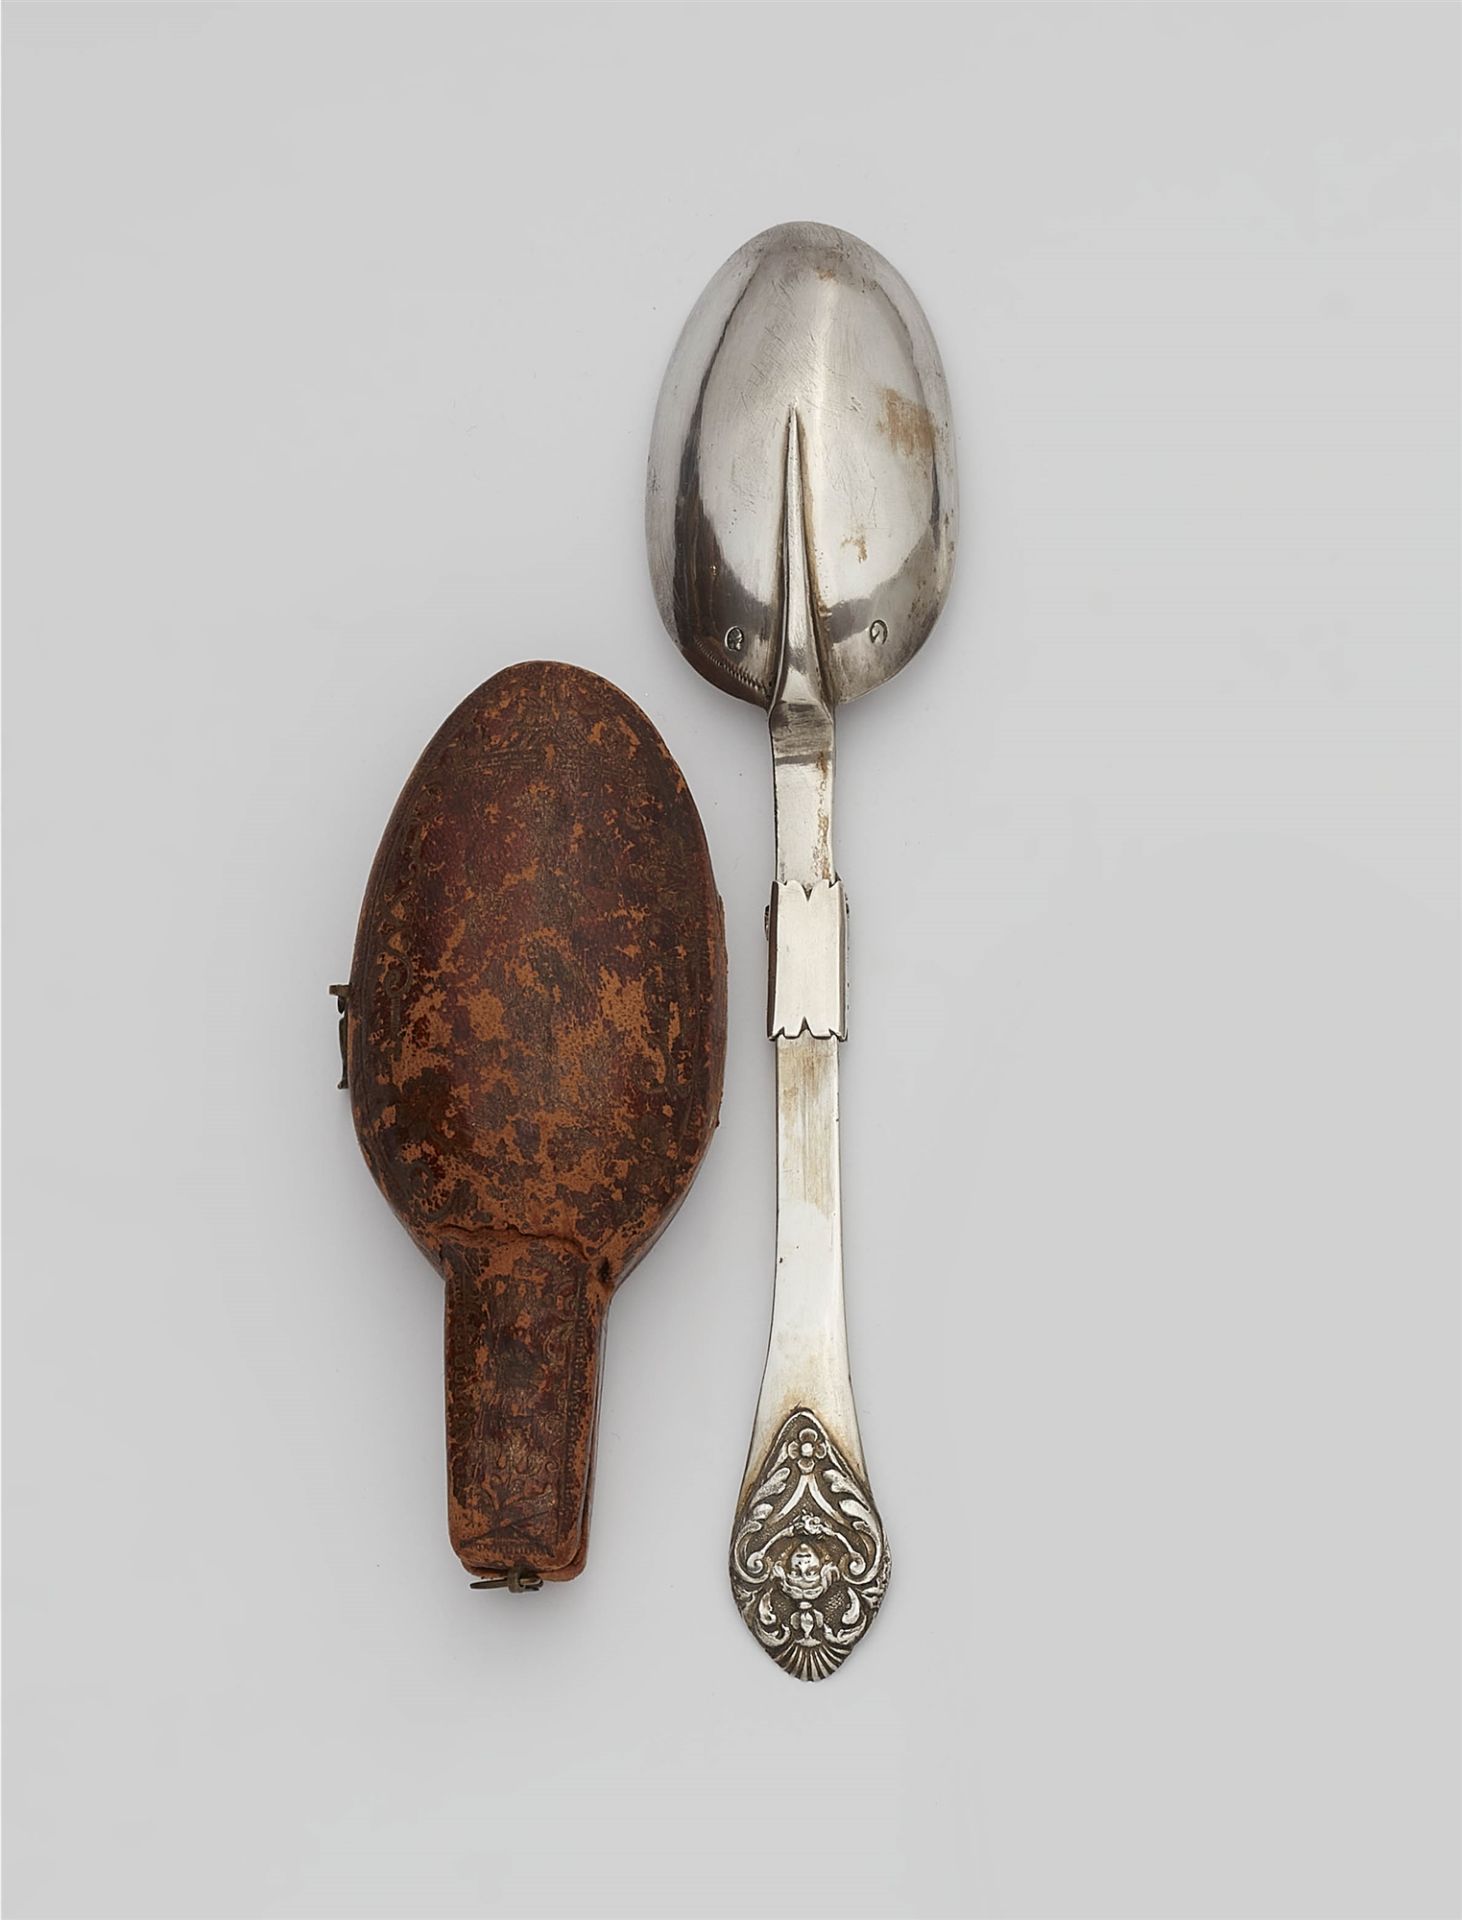 An Augsburg silver folding spoon in a case